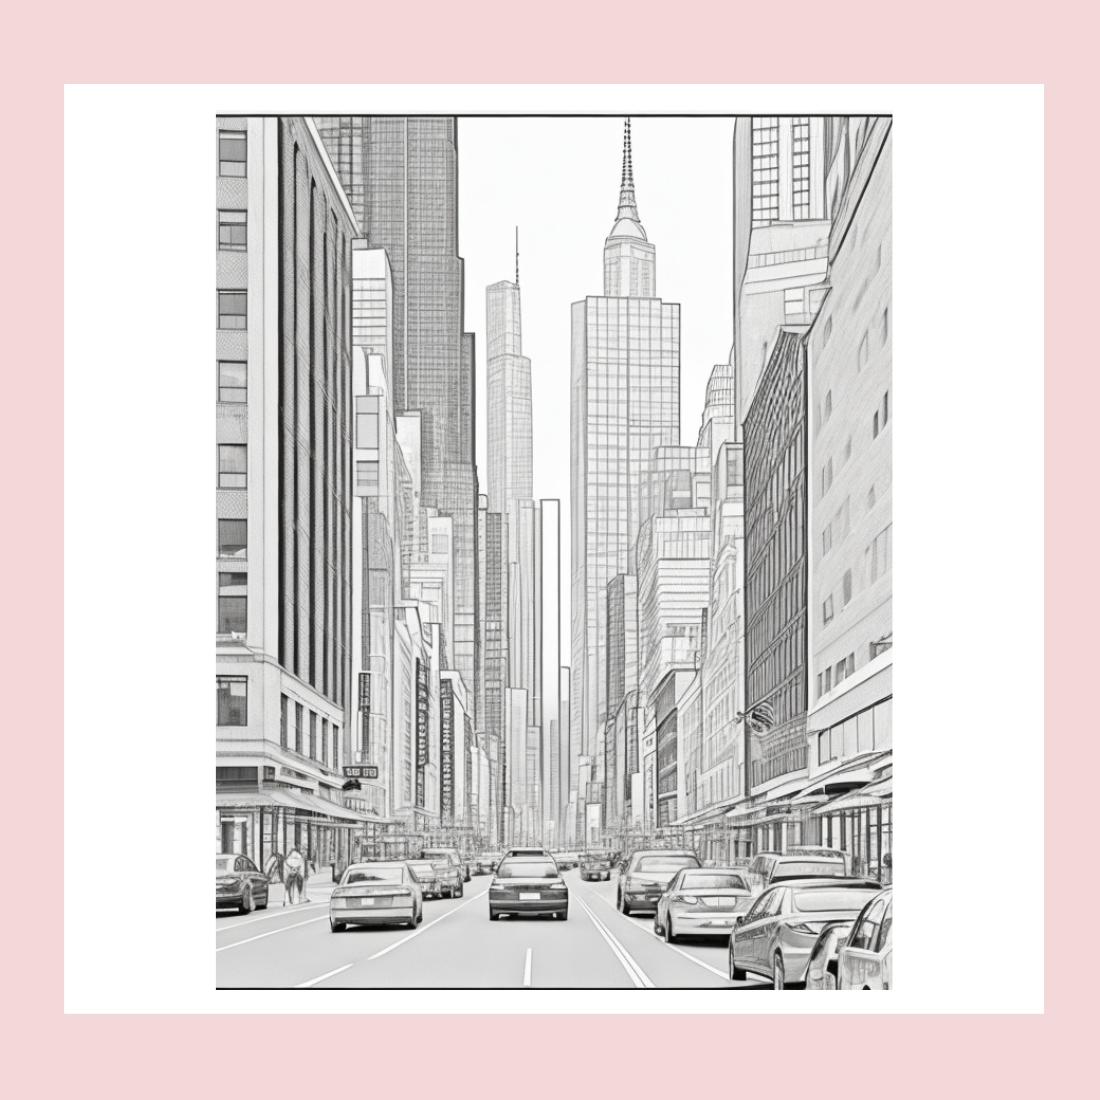 A cityscape with skyscrapers and a busy street scene coloring page 5 preview image.